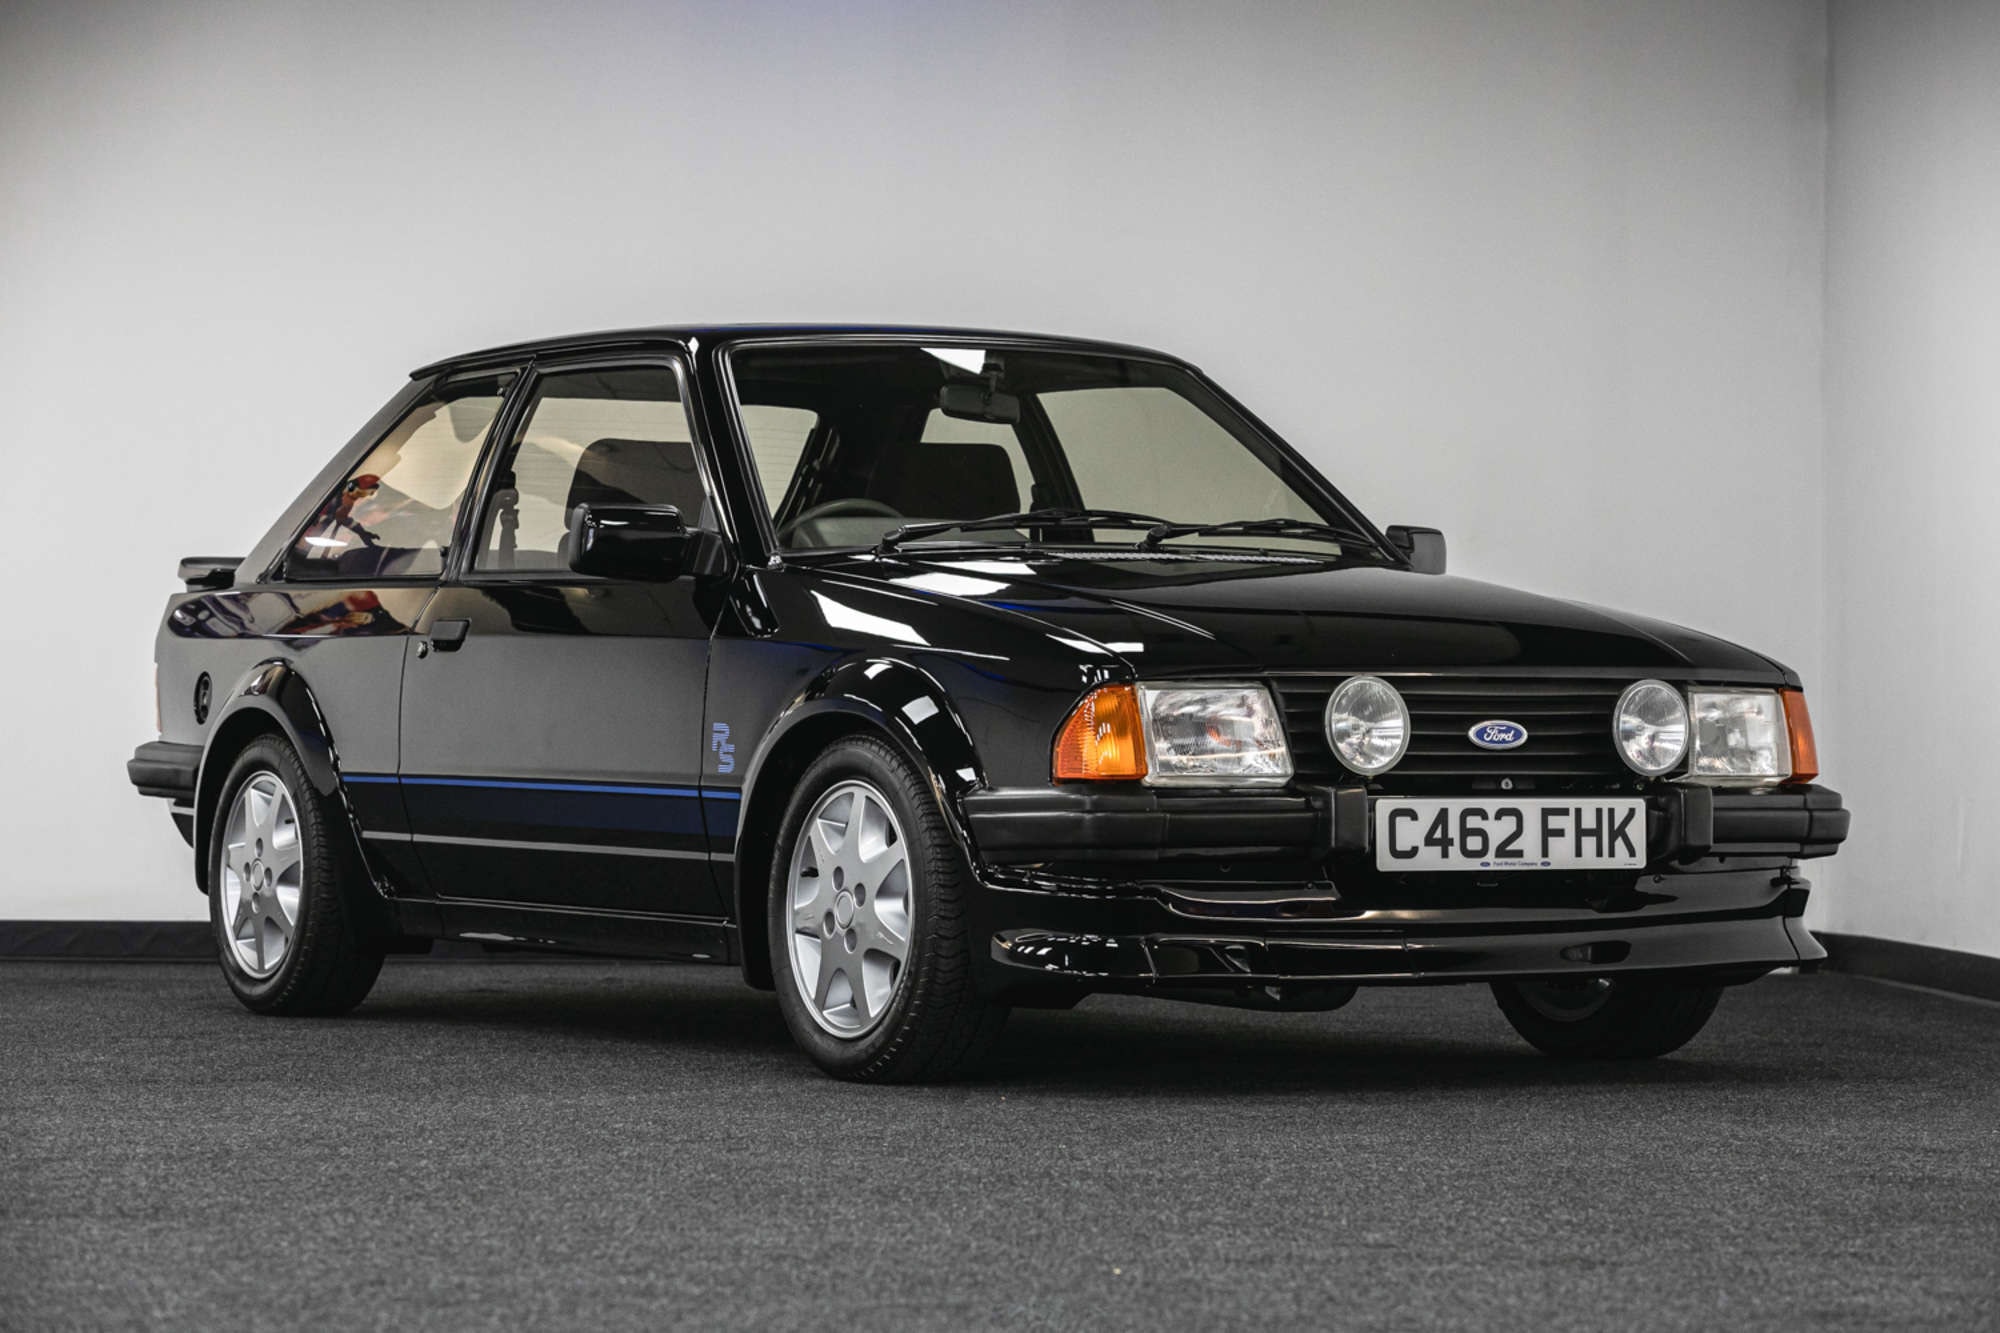 Princess Diana 1985 Ford Escort RS Turbo S1 Car Silverstone Auctions Info